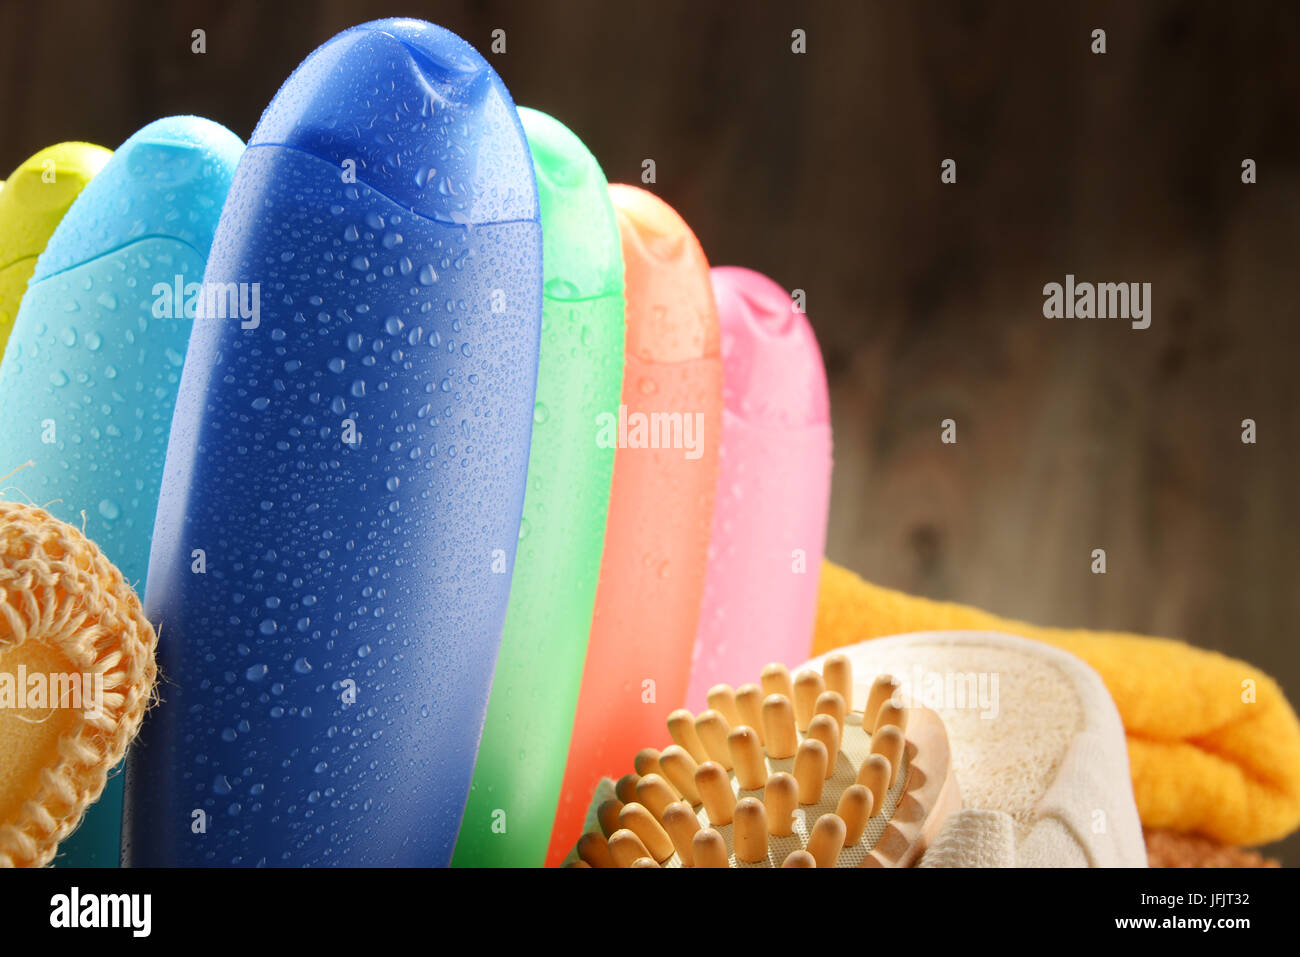 Plastic bottles of body care and beauty products. Stock Photo